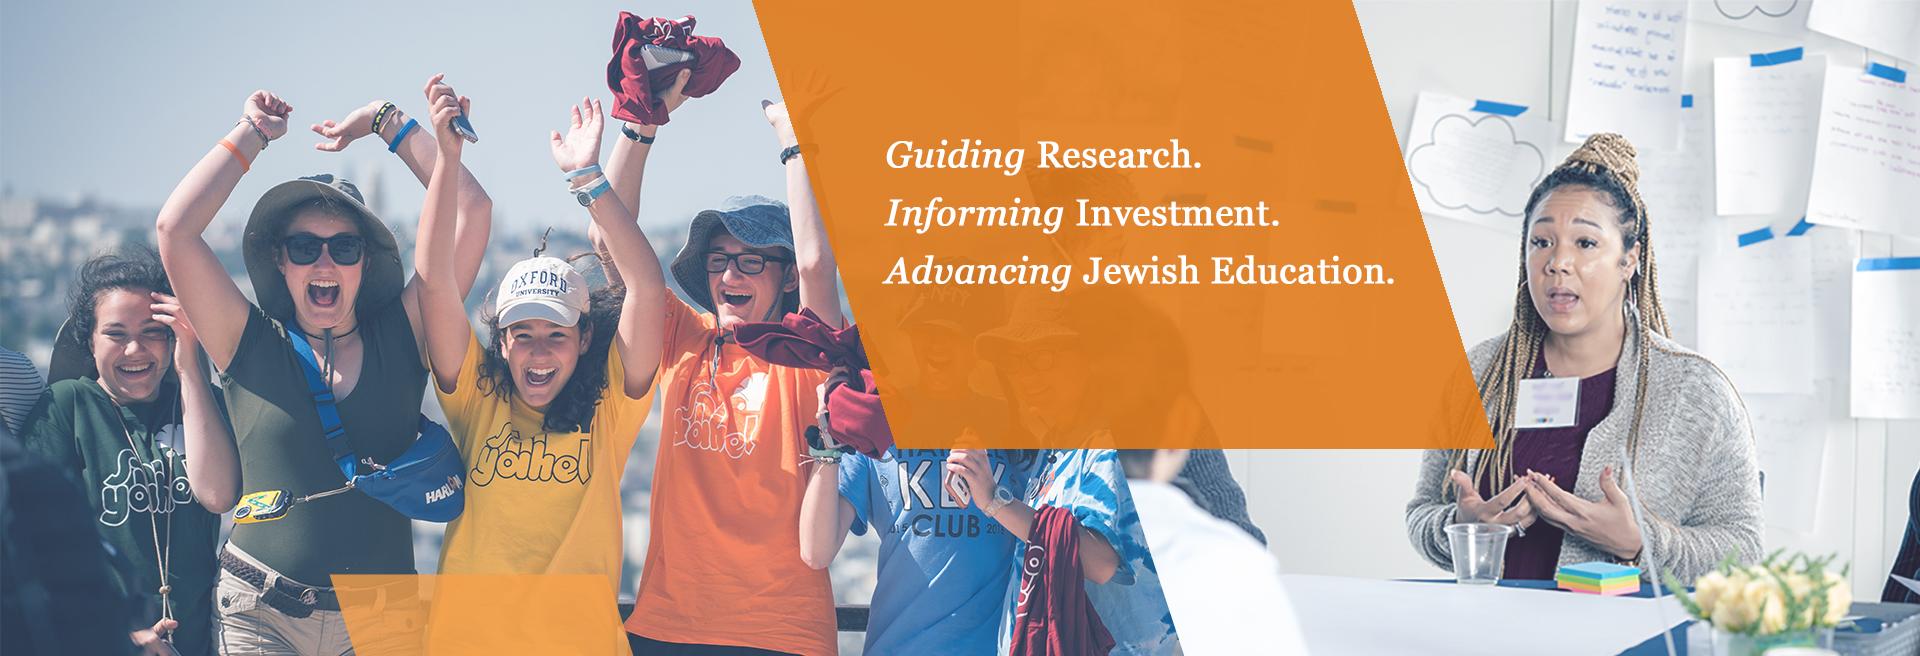 Guiding Research. Informing Investment. Advancing Jewish Education.